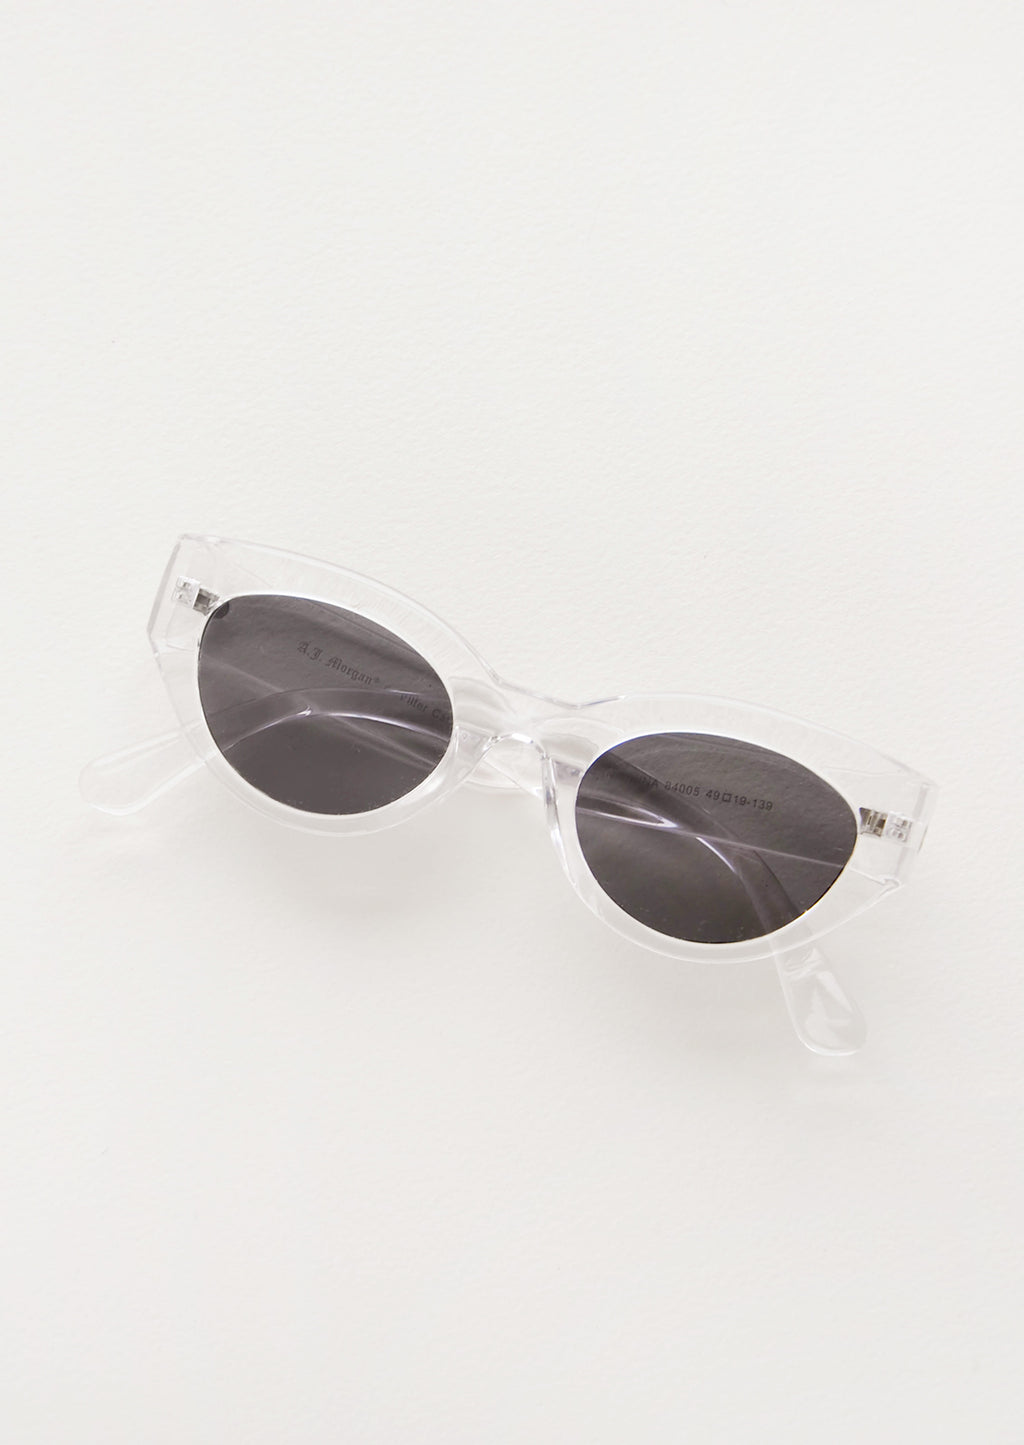 Crystal Clear: Gina Sunglasses in Crystal Clear - LEIF